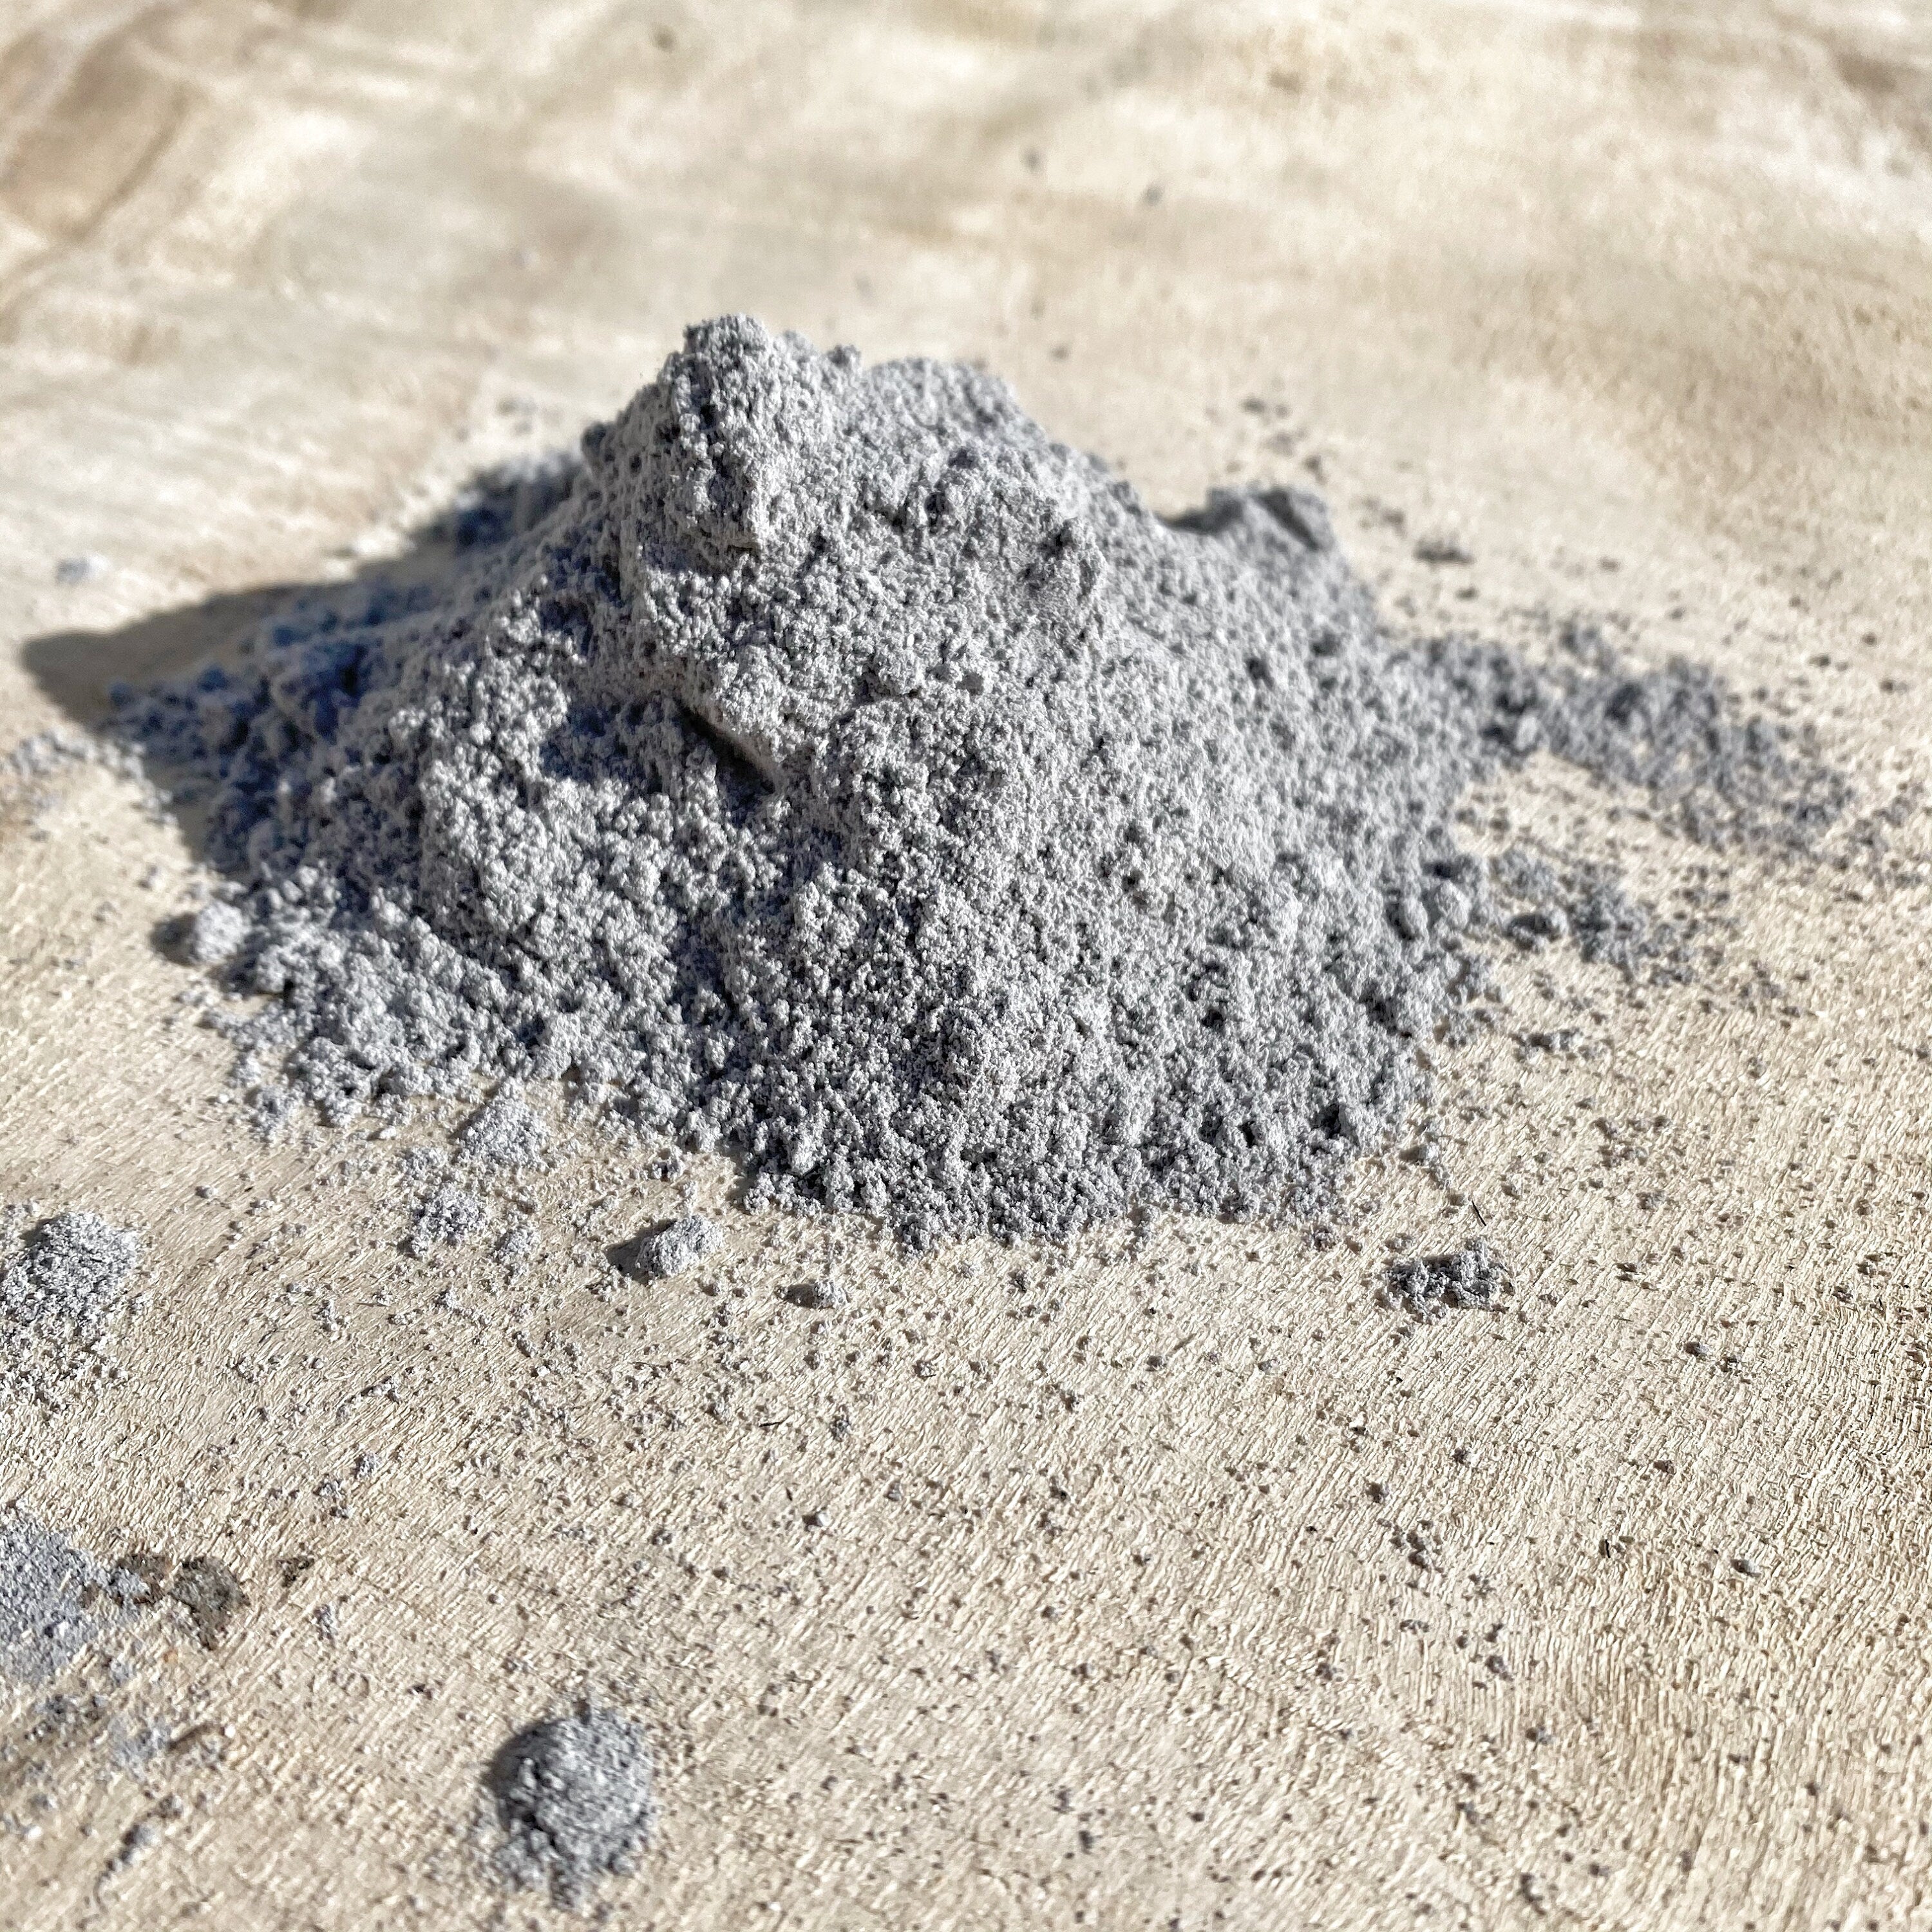 Close-up of Vibhuti Sacred Ash powder, a fine gray substance used in Hindu rituals, spread on a beige surface, symbolizing purity and spirituality.